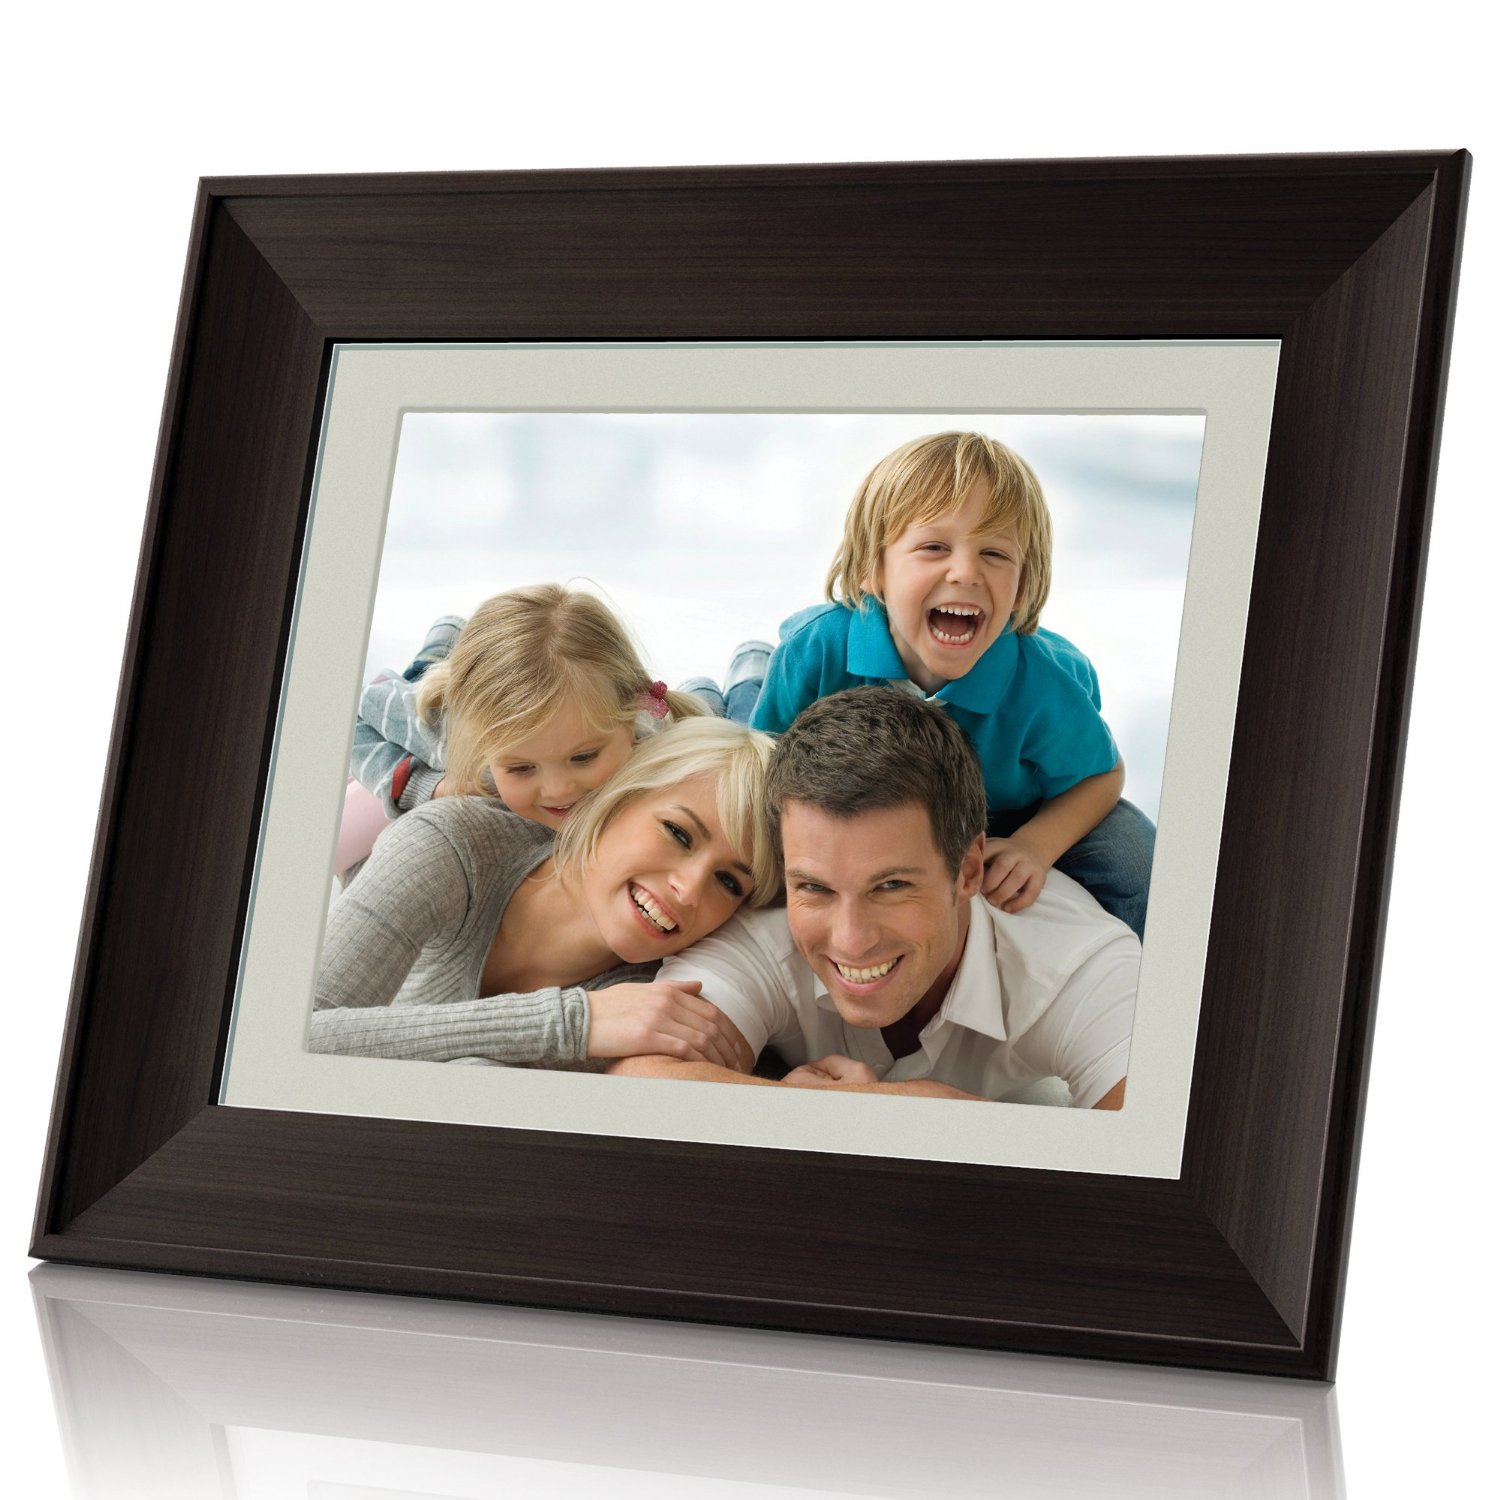 Coby 10.4-Inch Digital Photo Frame with MP3 Player  $52.00